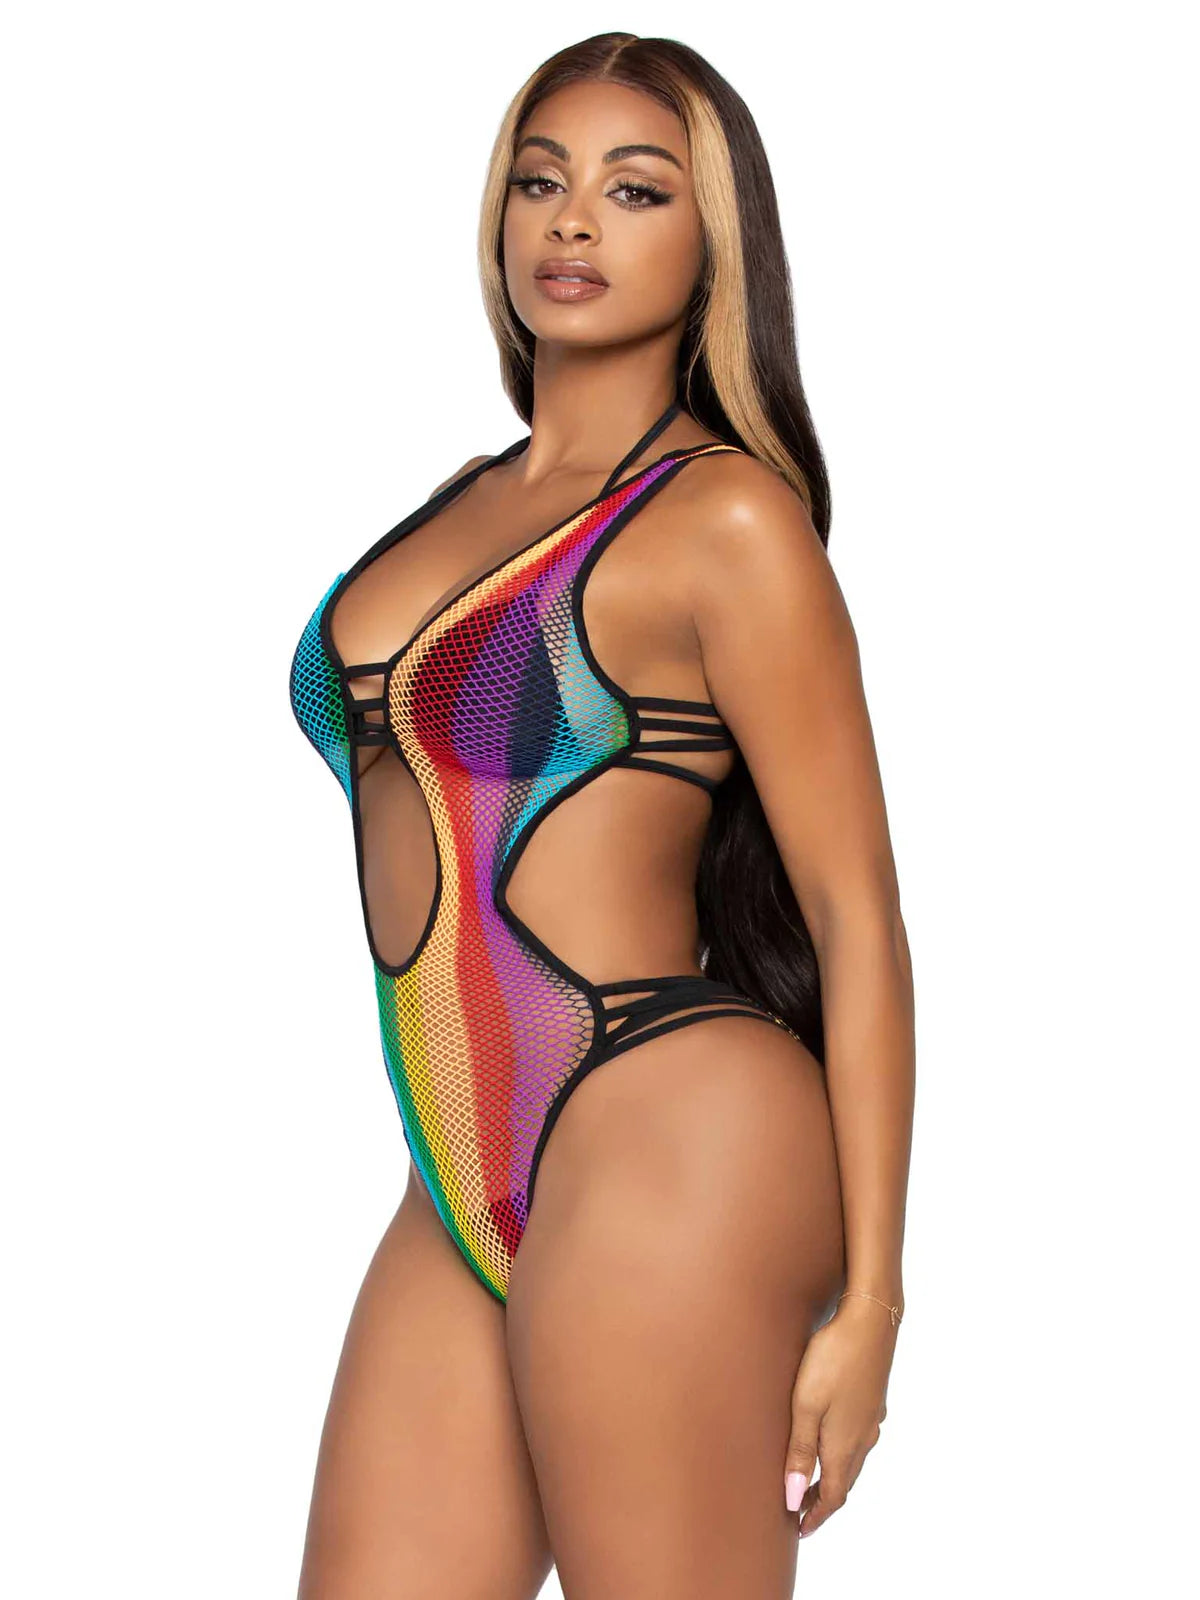 Sexy Lingerie Fishnet Body Stocking - Rainbow Striped Cutout